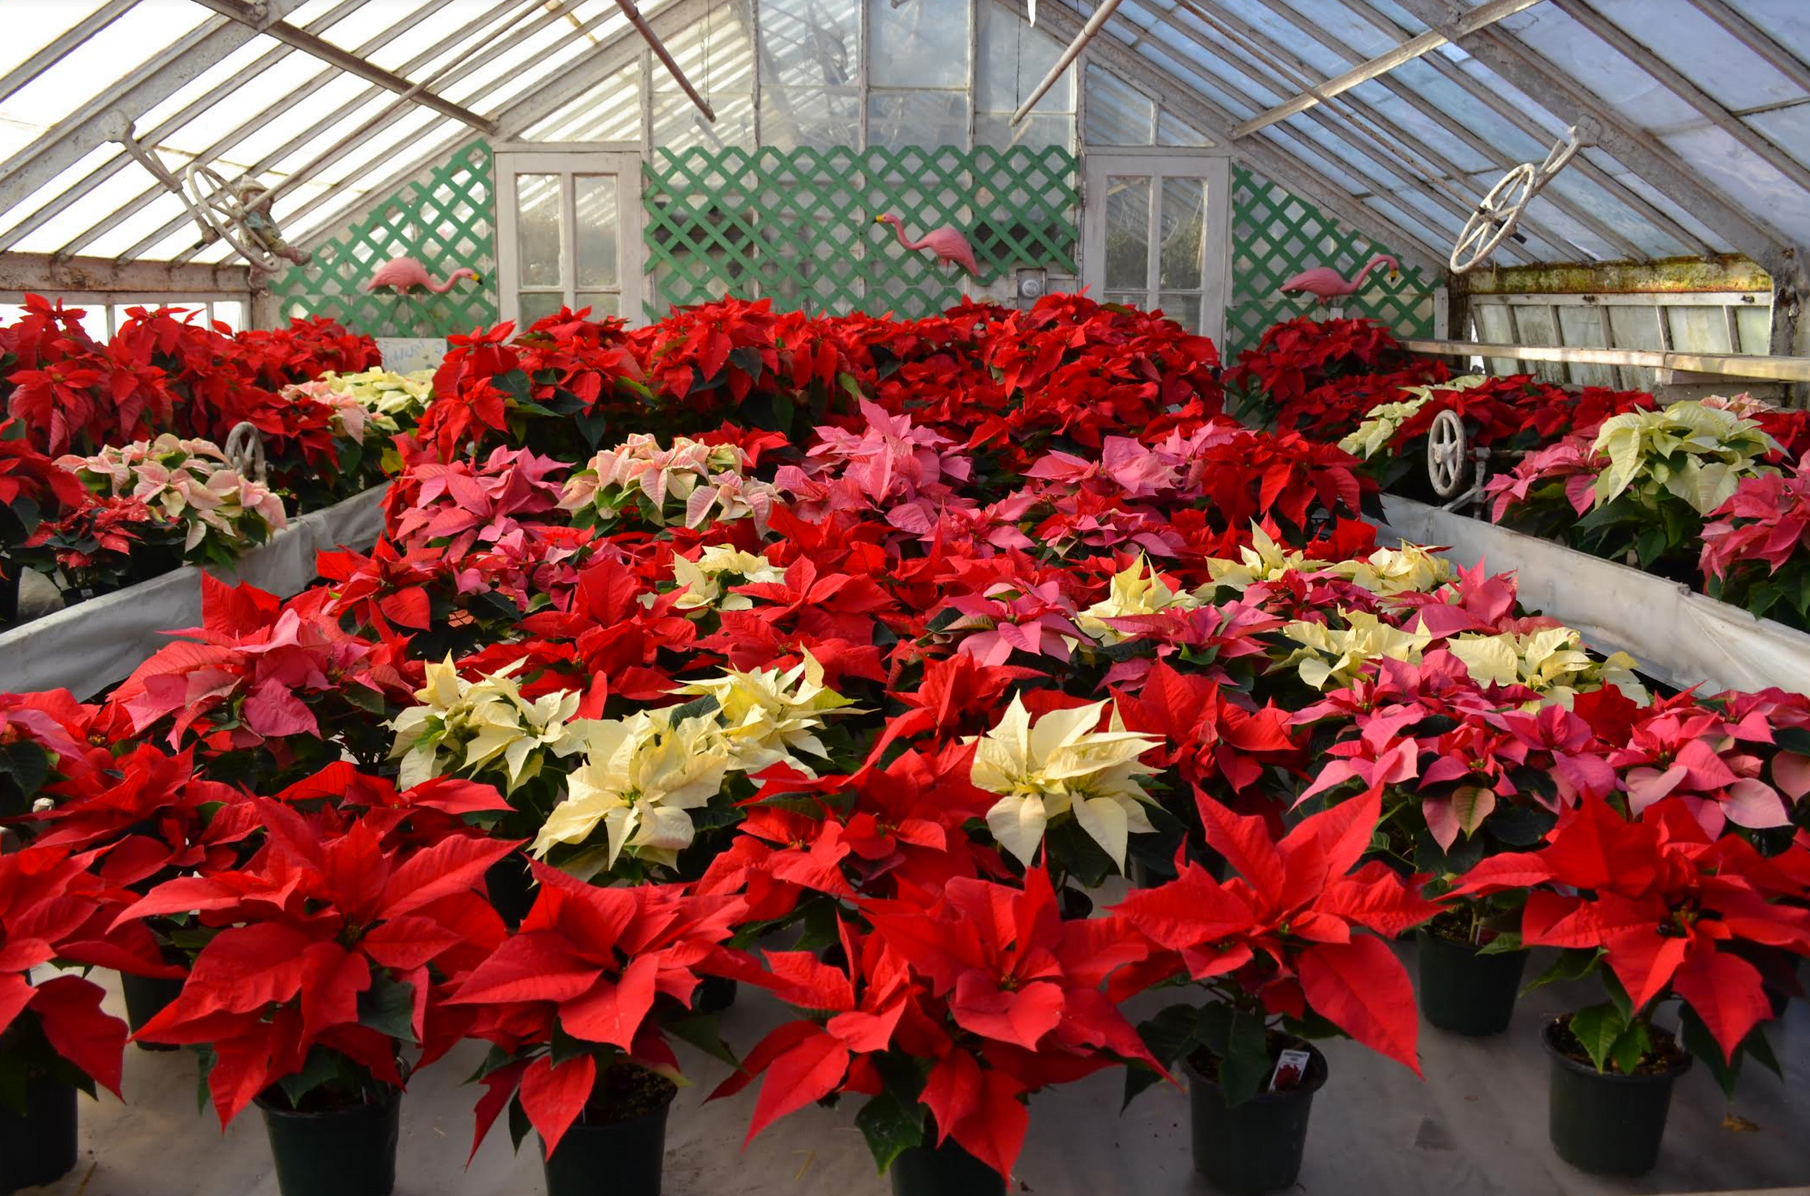 Augustine's Farm on King Street offers freshly cut Christmas trees, wreathes, pointsettias and more. Shop local.